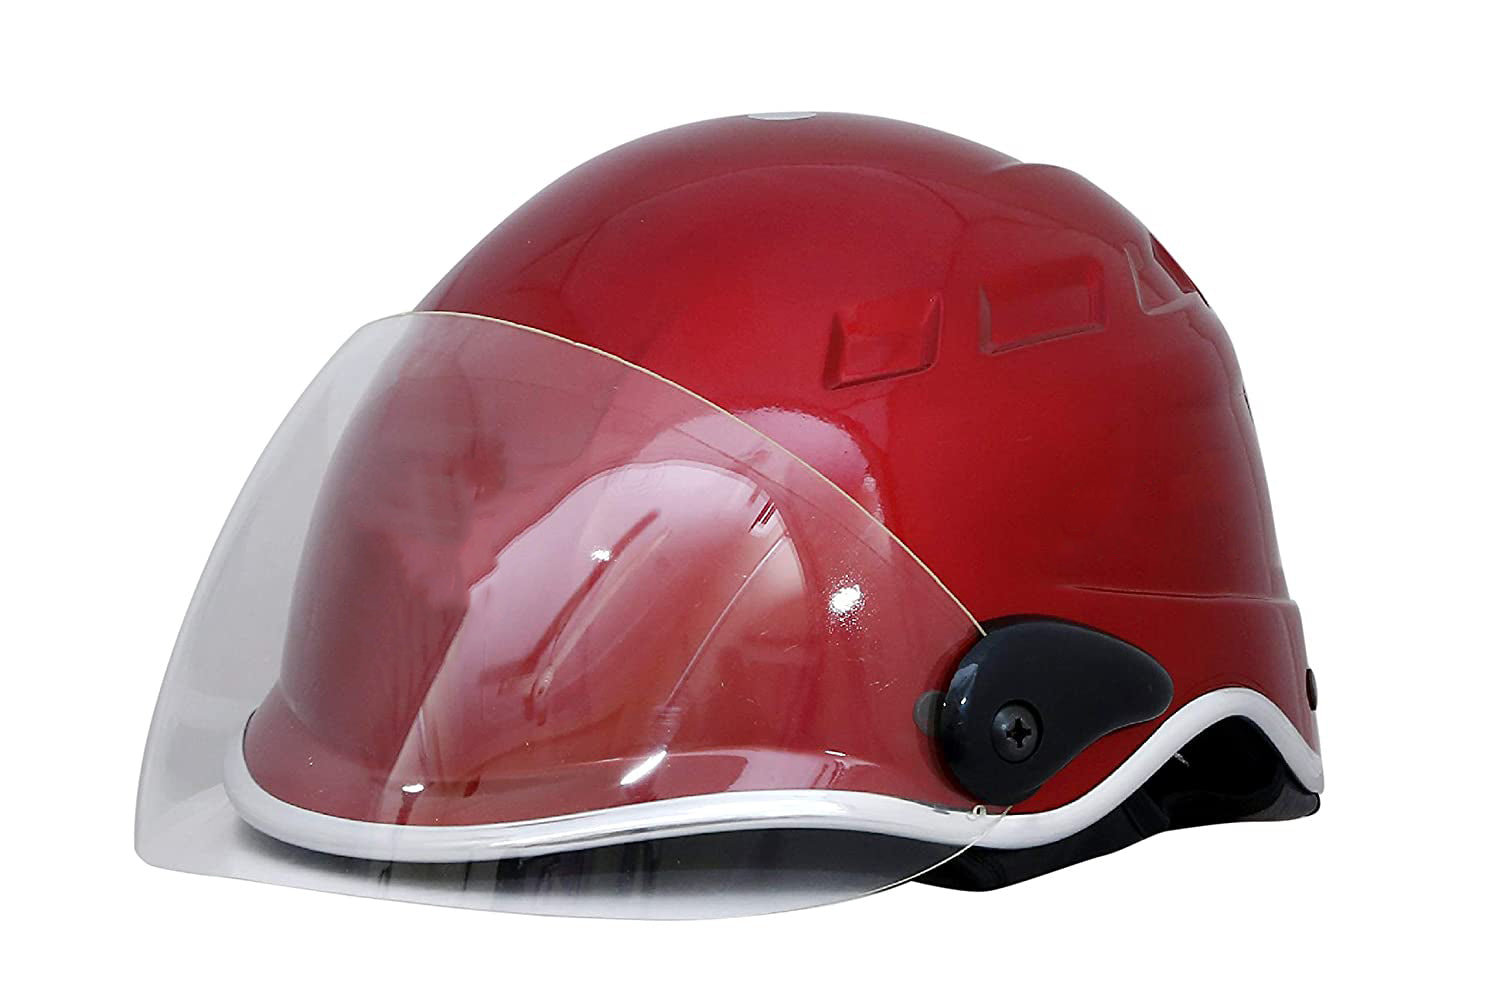 Detec™ Safety Cap with Visor (Red)